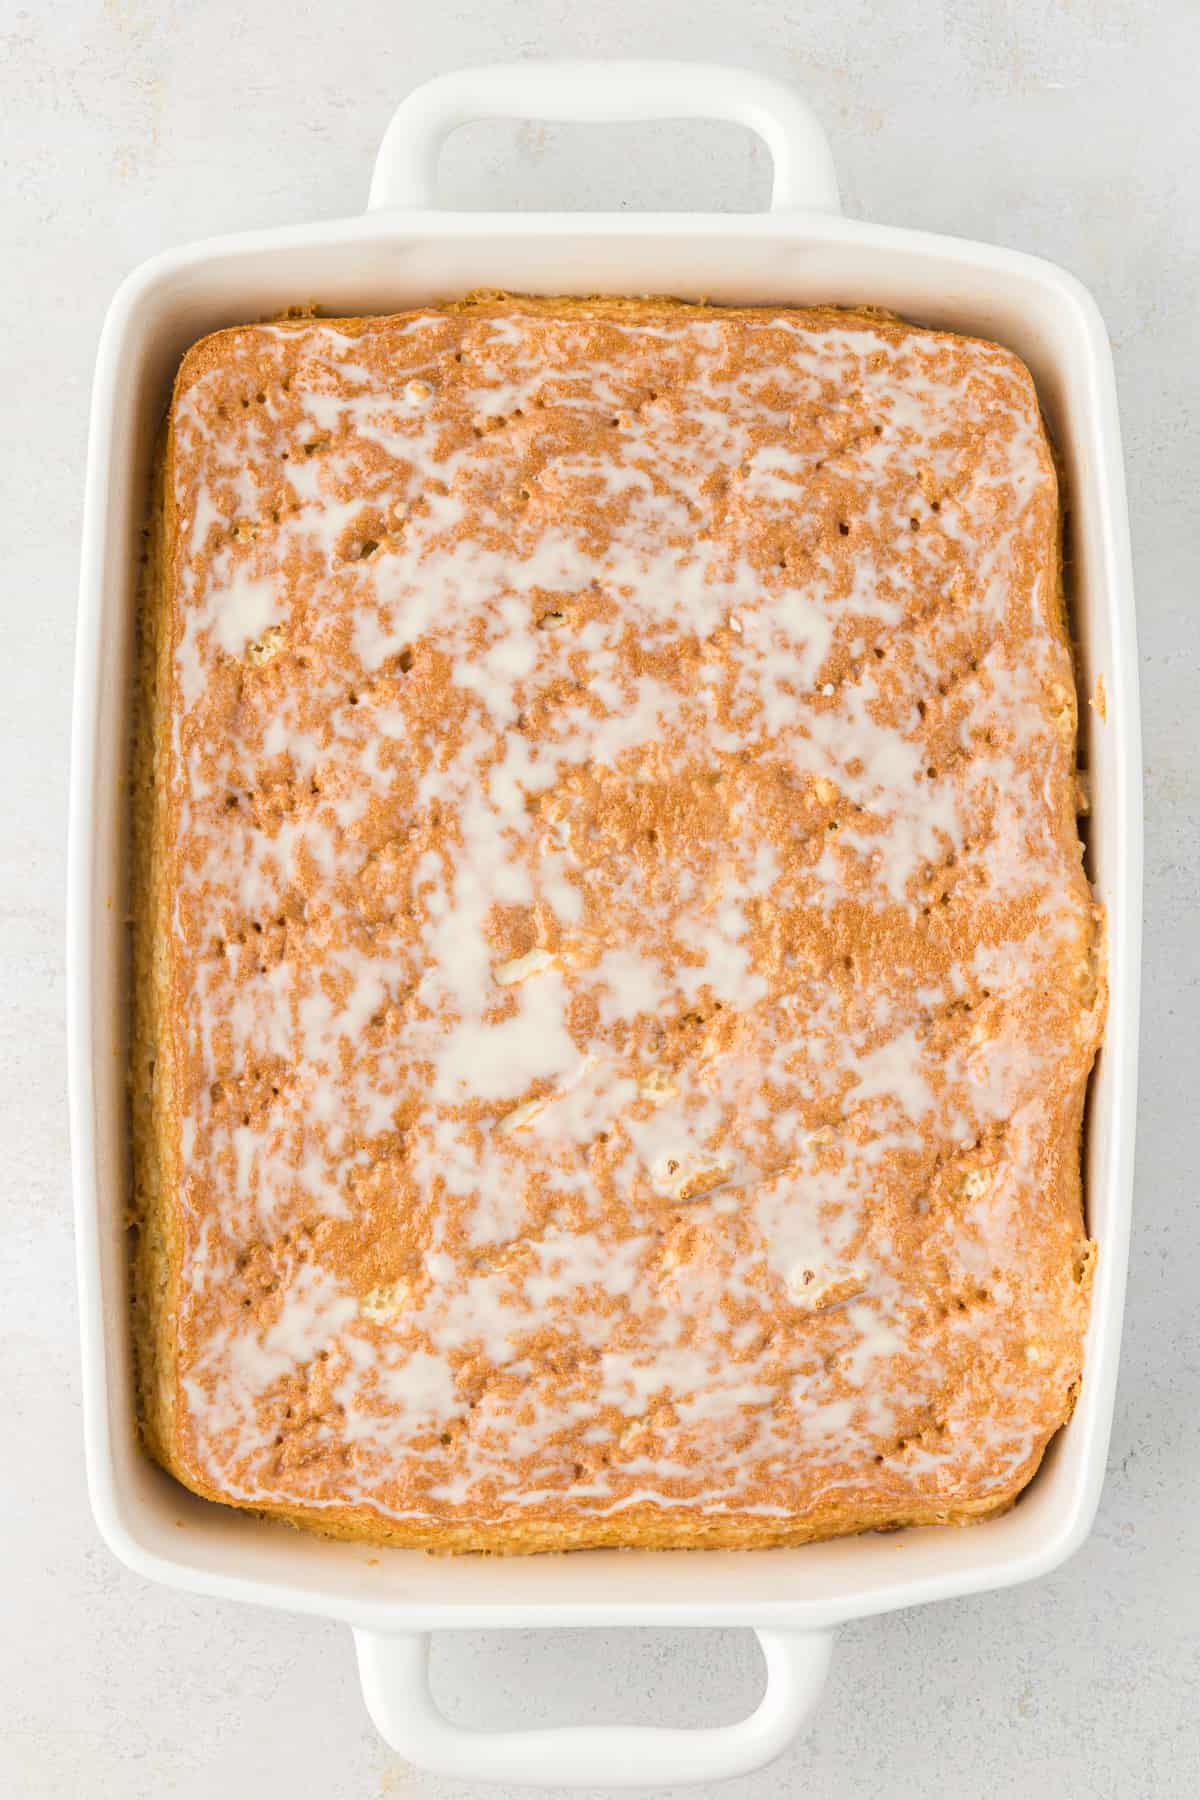 overhead view of a cake in a white rectangular baking dish that has a milk mixture poured over top and soaking into it